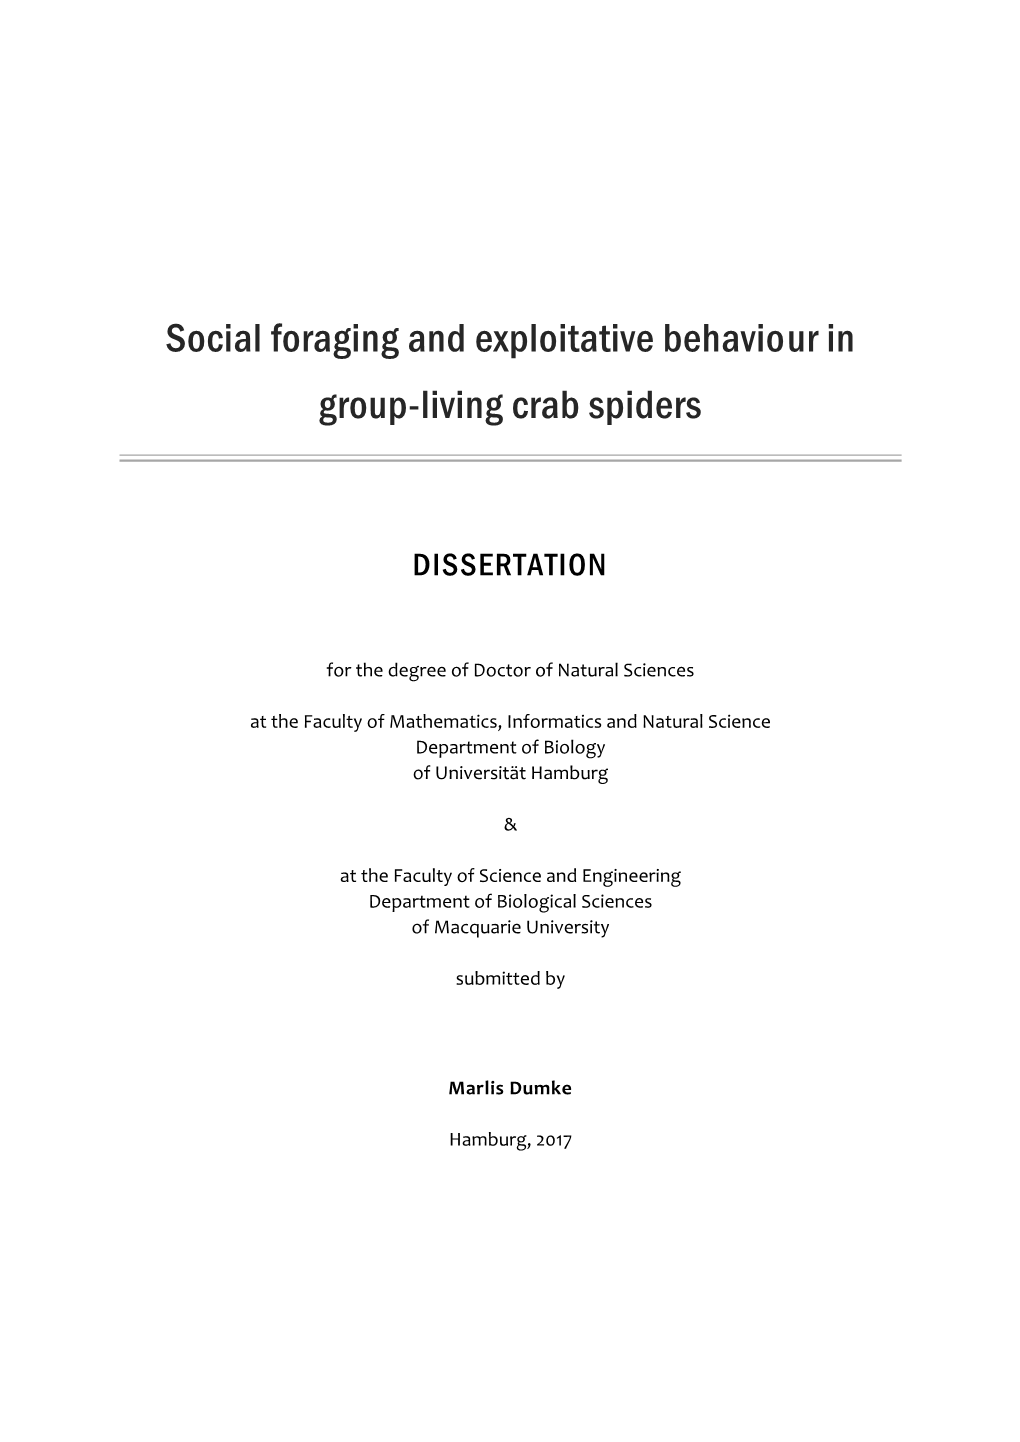 Social Foraging and Exploitative Behaviour in Group-Living Crab Spiders